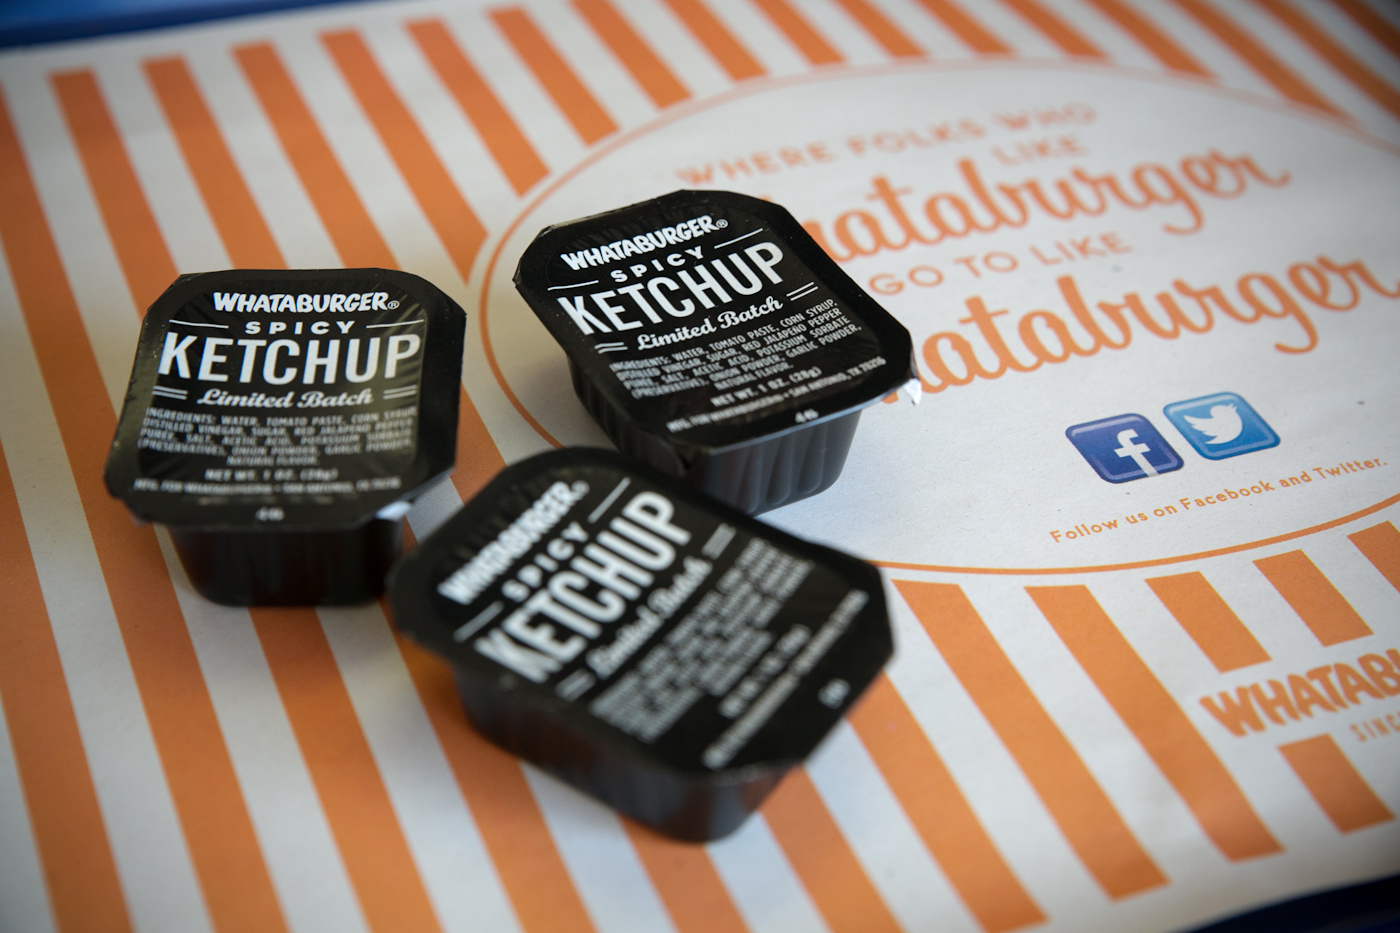 Buy One Honey Butter Chicken Biscuit Online, Get One Free At Whataburger  Through June 14, 2020 - Chew Boom